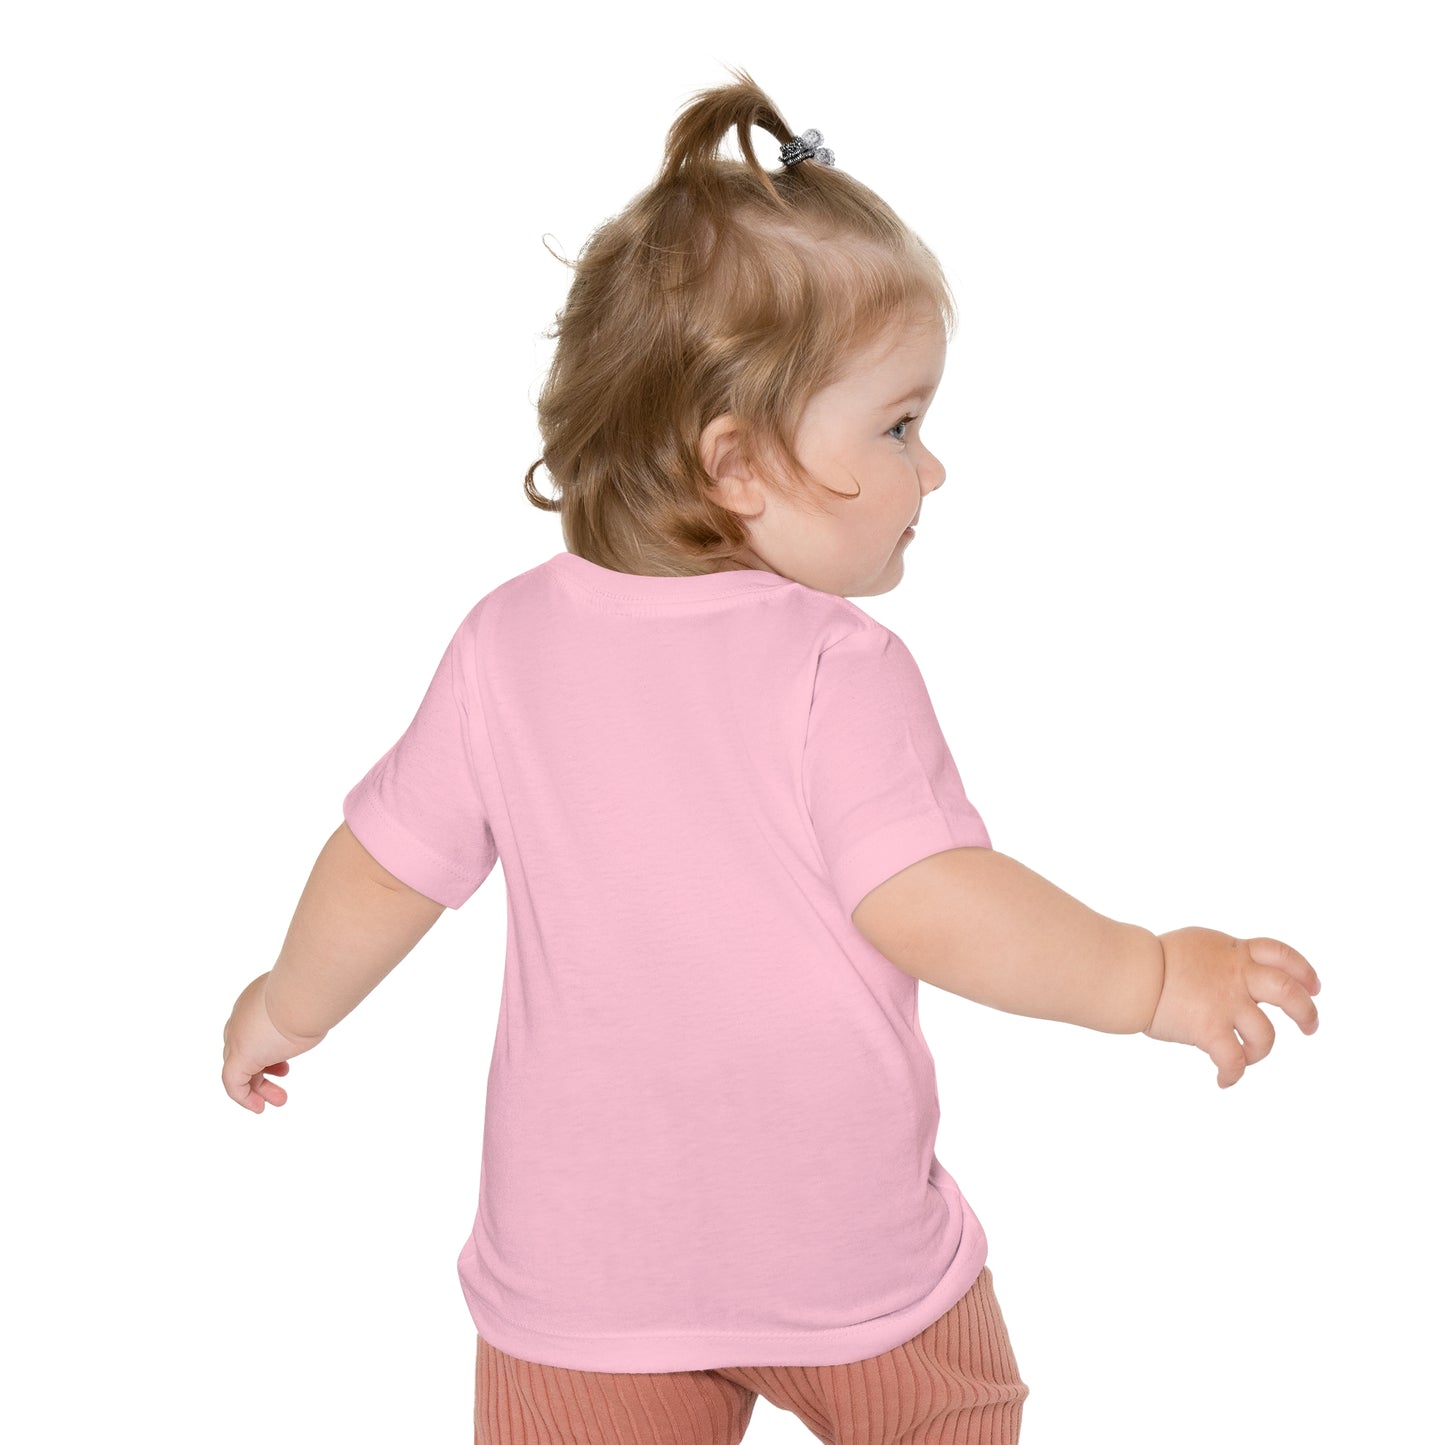 Toddler in a pink Printify Unisex Baby's Easter-Gnome T-shirt and striped pants viewed from behind.